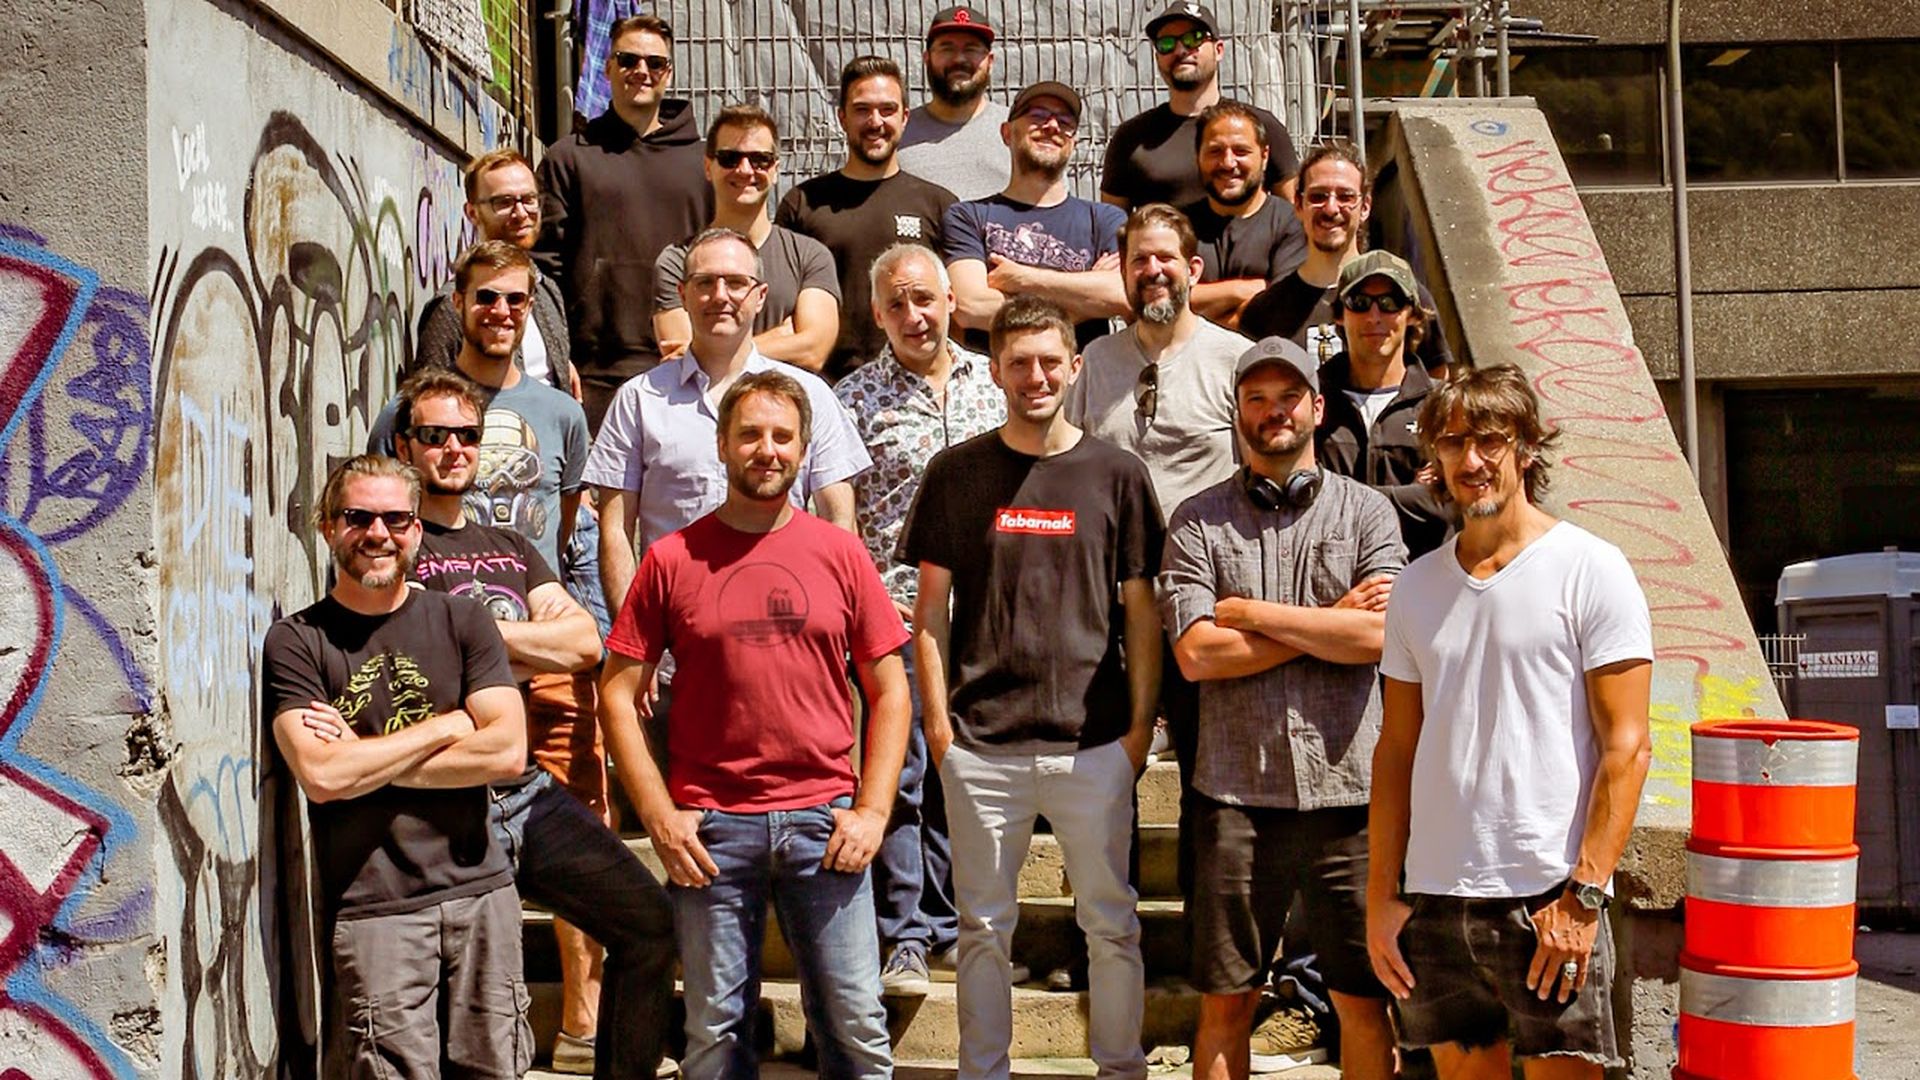 Photograph of a group of game developers standing on a staircase. All are white men.